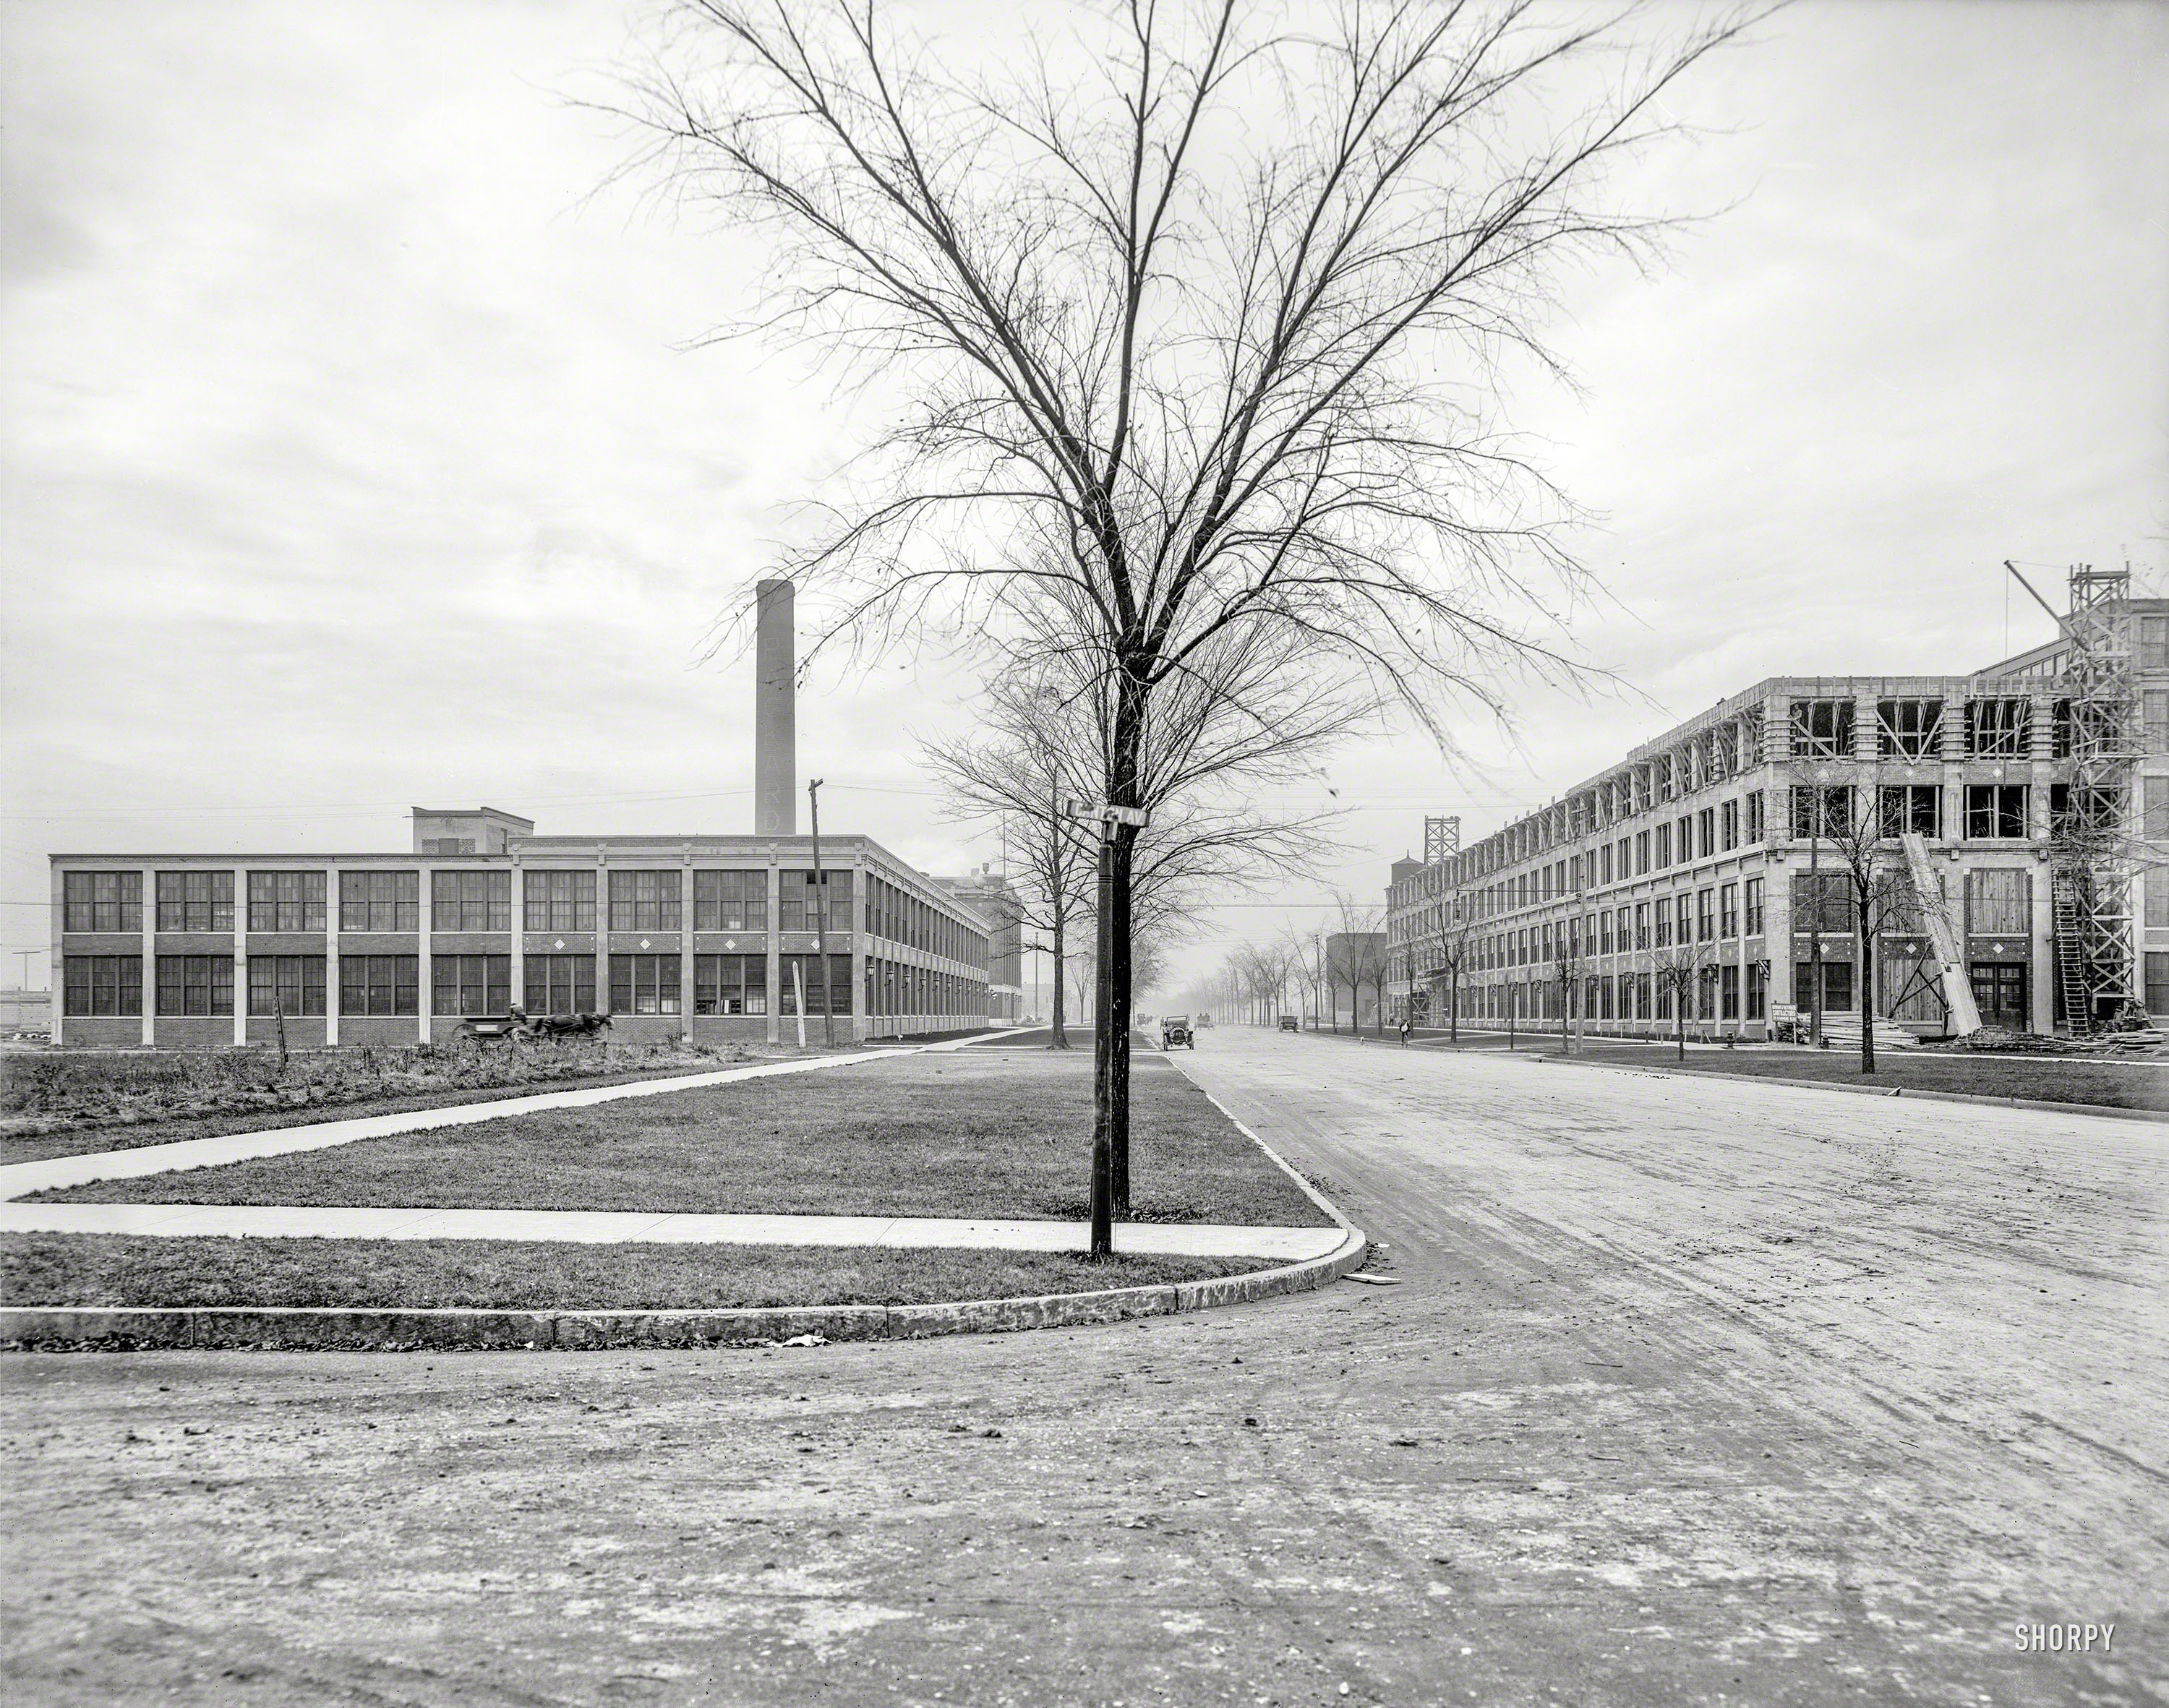 Detroit circa 1911. "Boulevard view, Packard auto plant." Expansion of the Albert Kahn-designed factory building on Grand Boulevard, now an infamous urban ruin. 8x10 inch dry plate glass negative, Detroit Publishing Company. View full size.